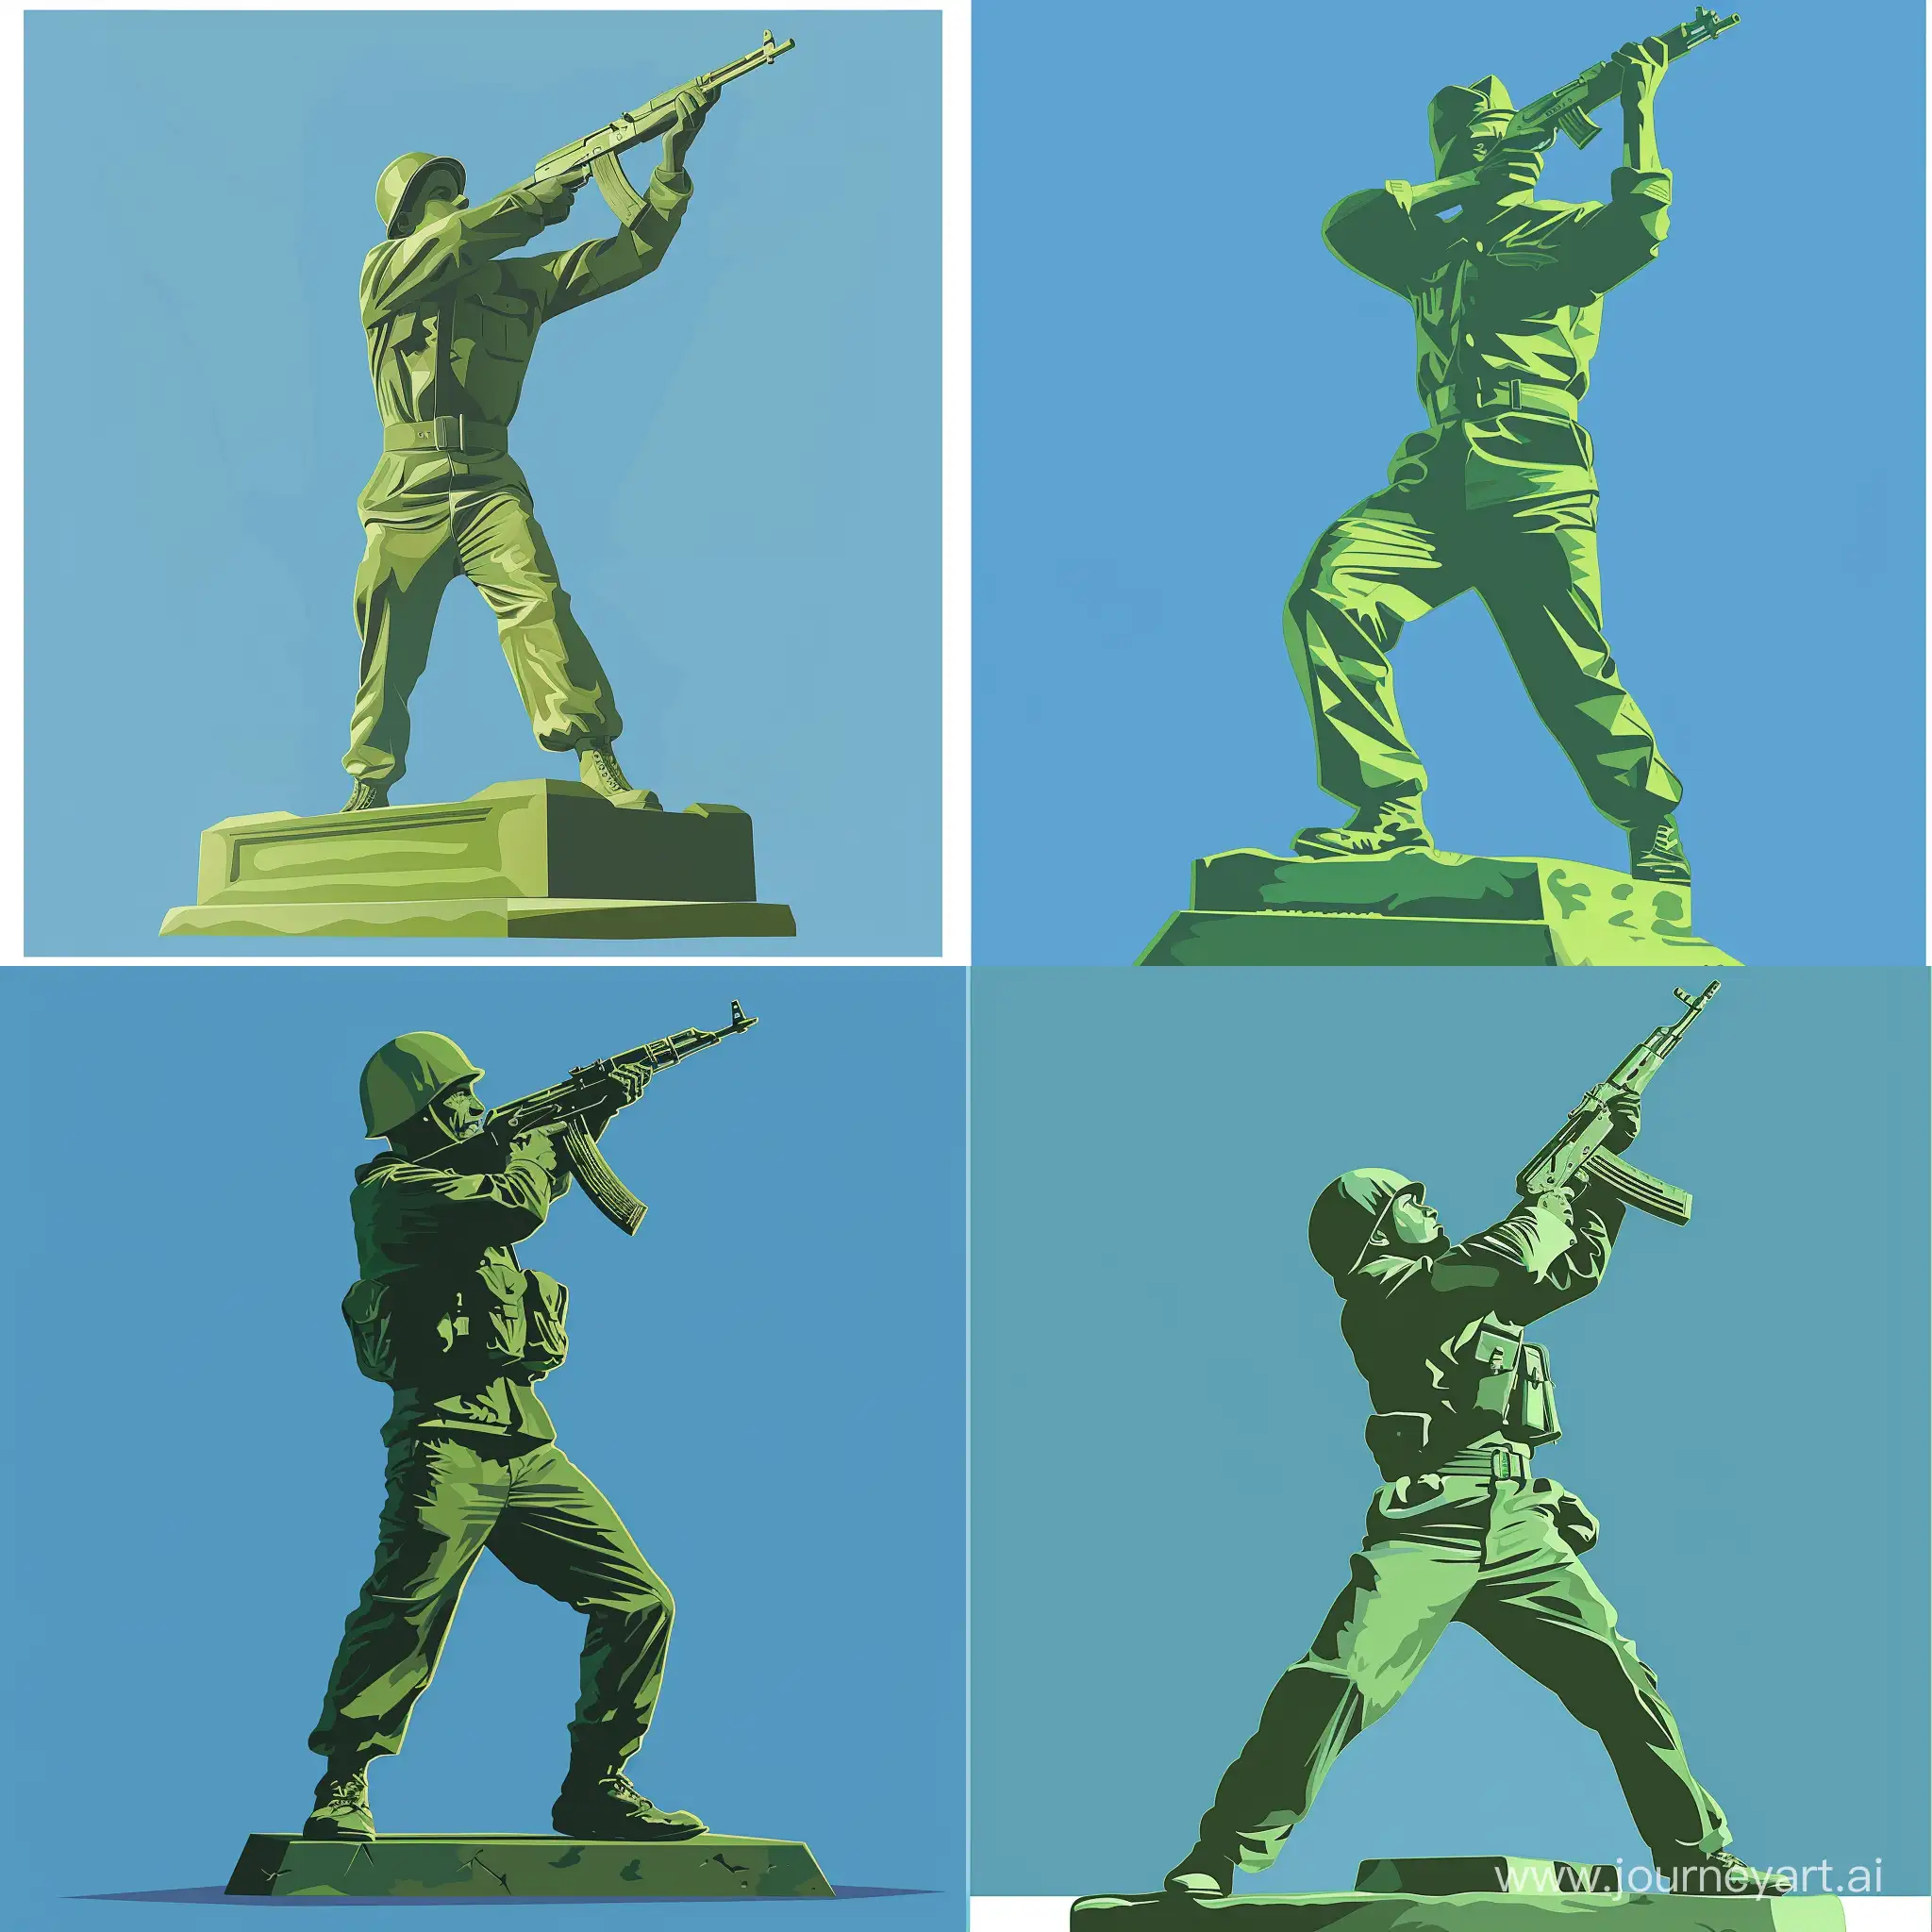 Vector image of a green statue of an Algerian soldier standing in 1954, raising his rifle to shoot, with a blue background